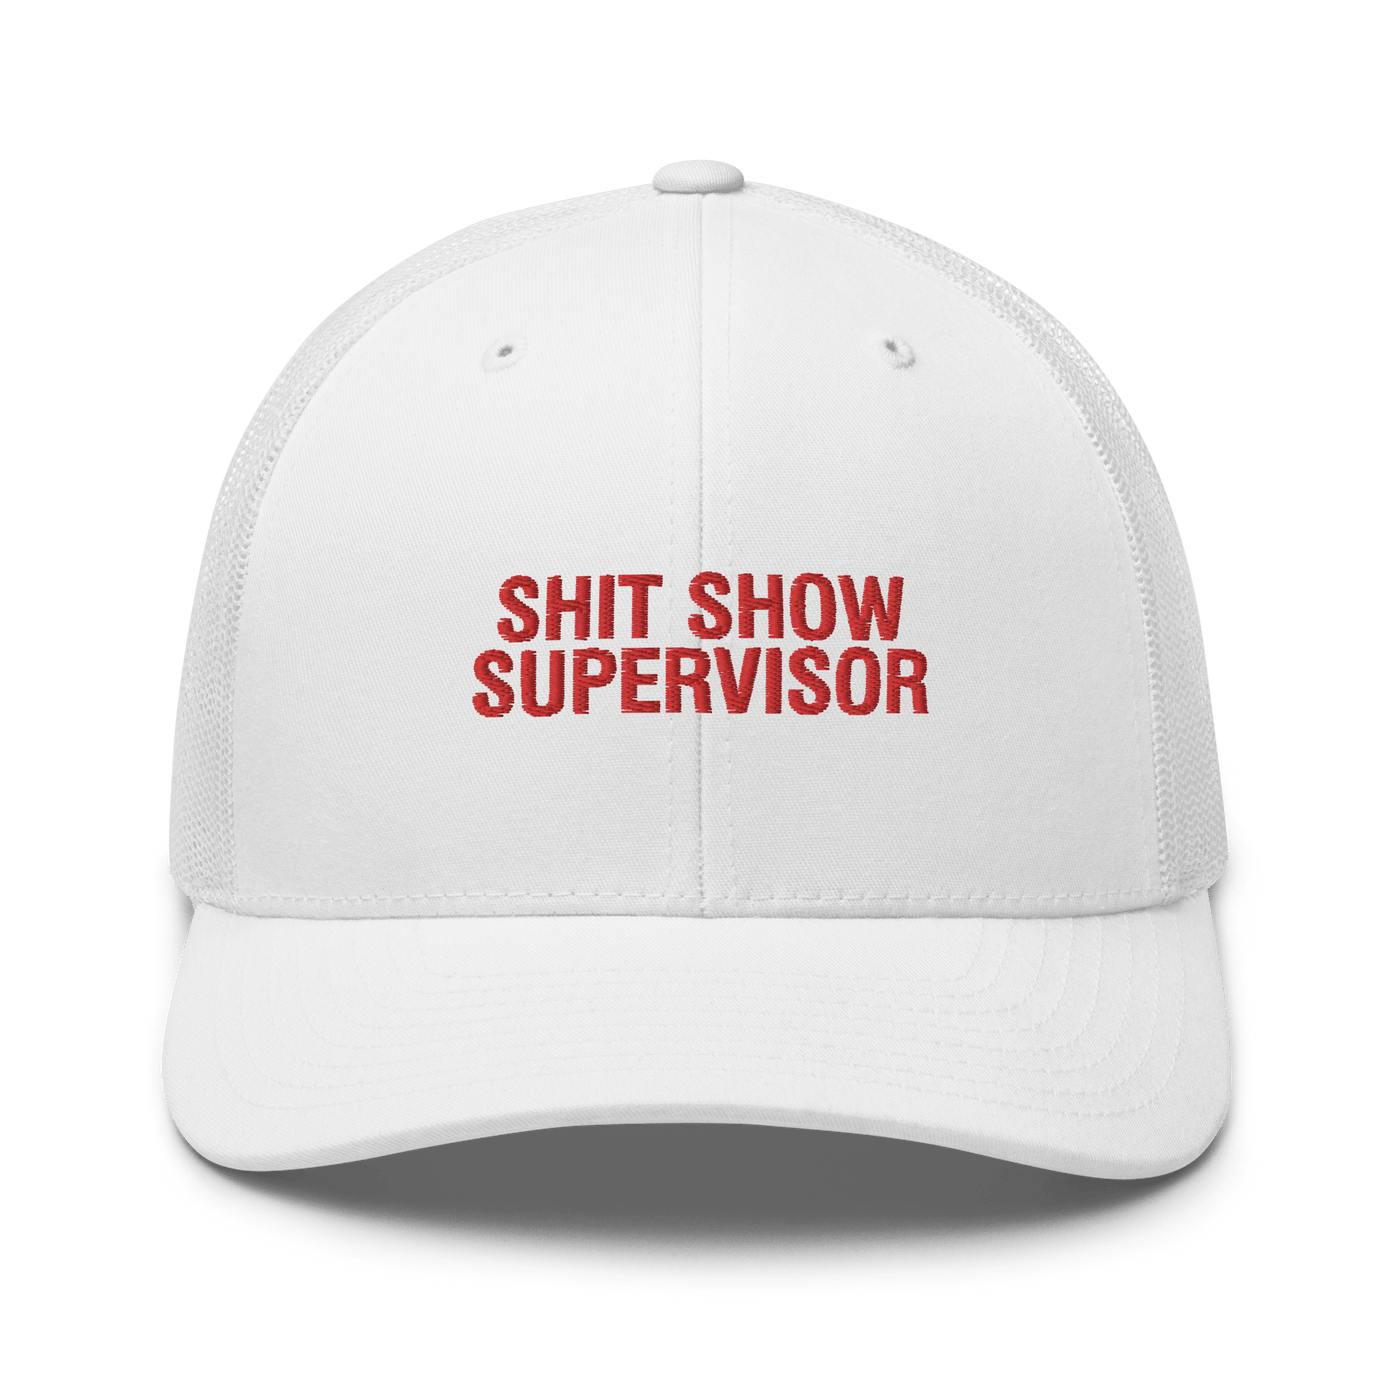 Shit Show Supervisor Trucker Cap - White - Just Another Cap Store